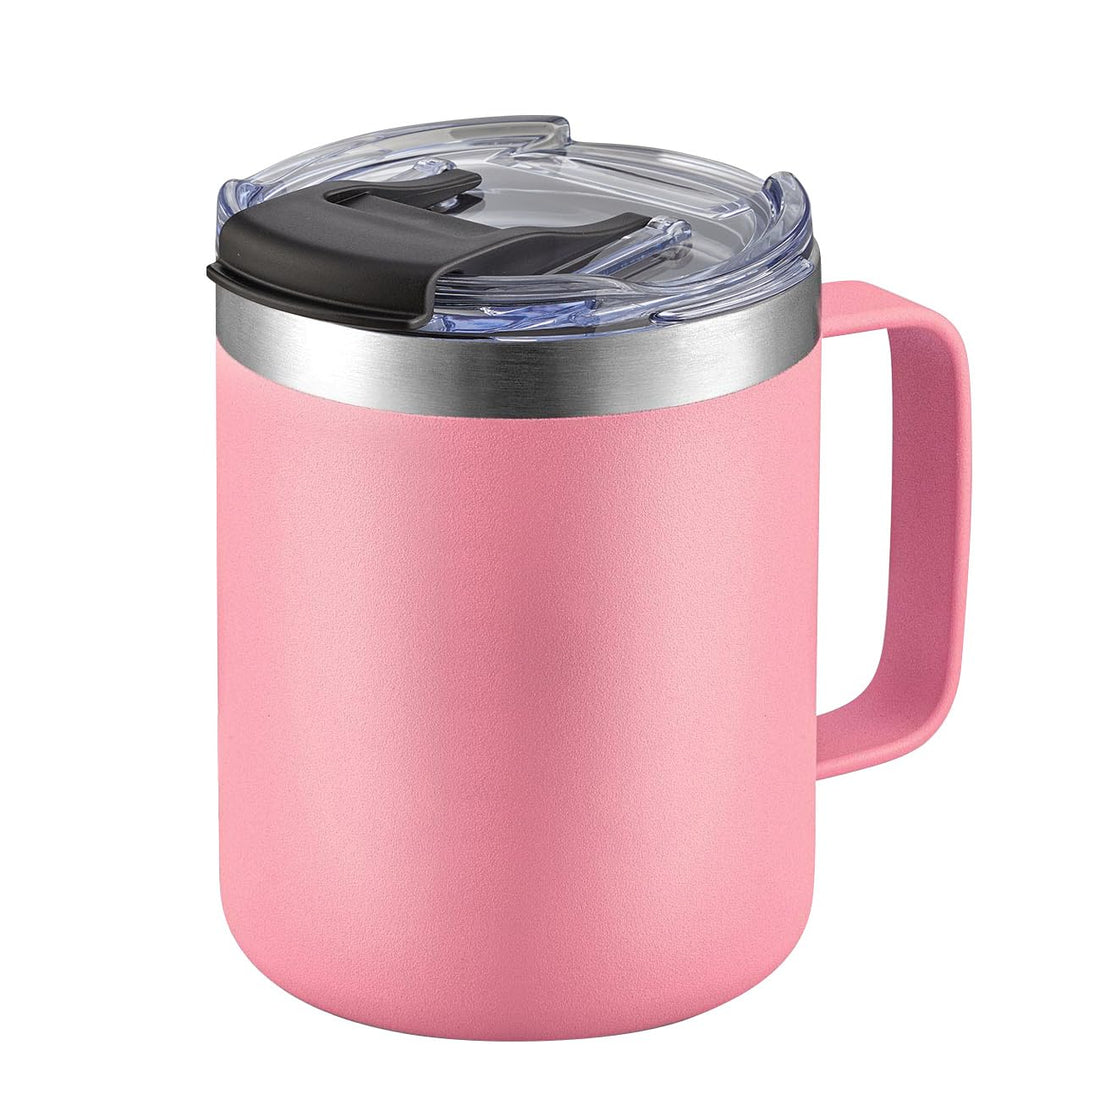 12oz Stainless Steel Insulated Coffee Mug with Handle, Double Wall Vacuum Travel Mug, Tumbler Cup with Sliding Lid, Pink